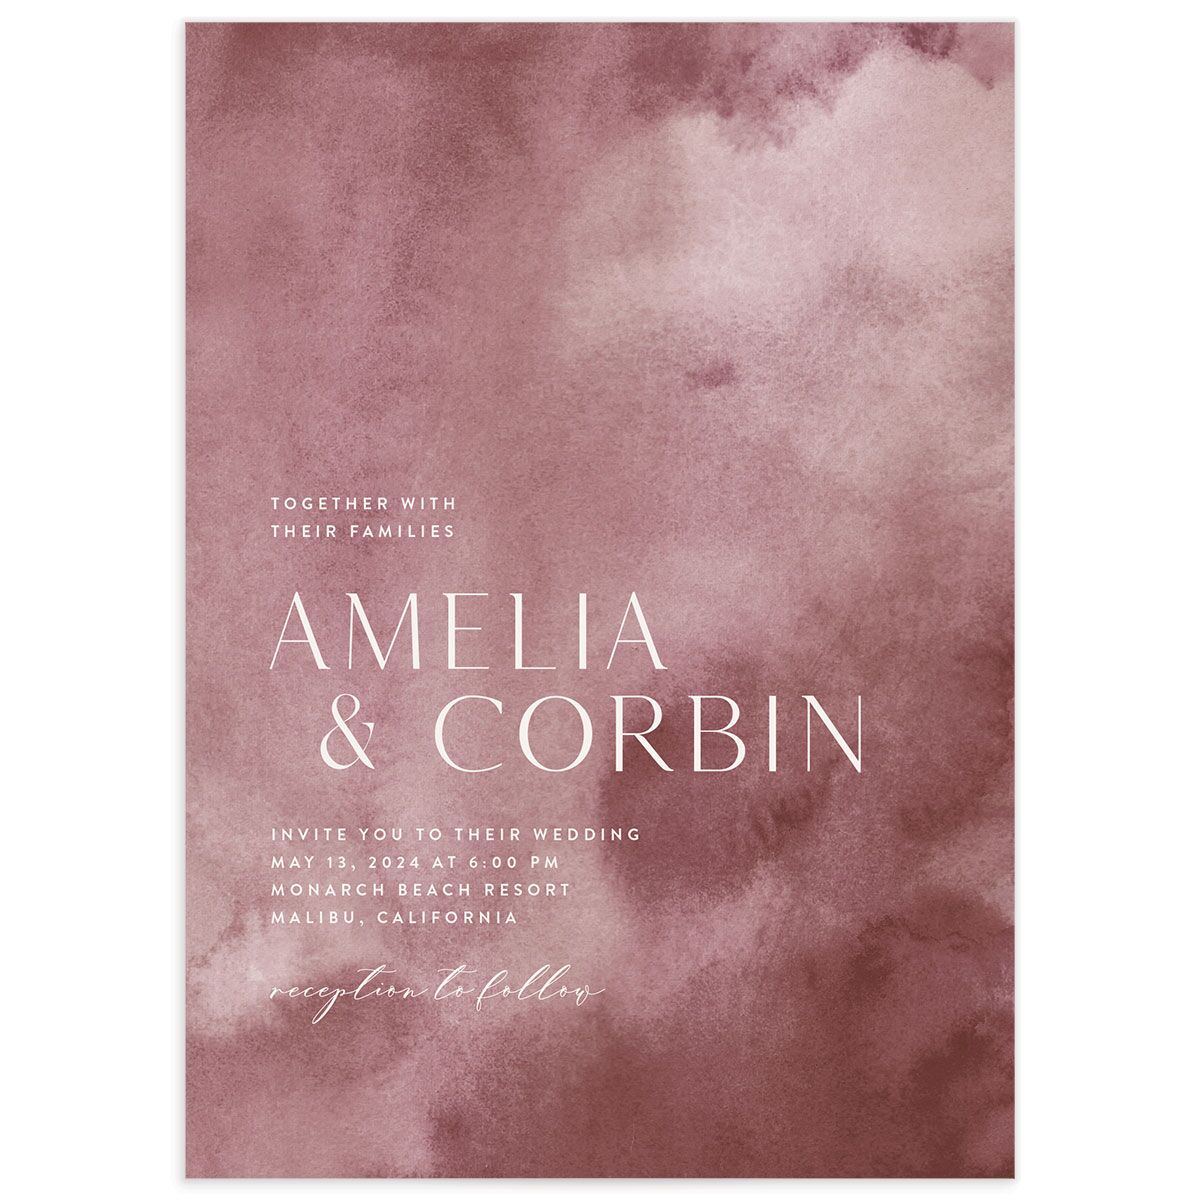 A Wedding Invitation from the Elegant Ethereal Collection